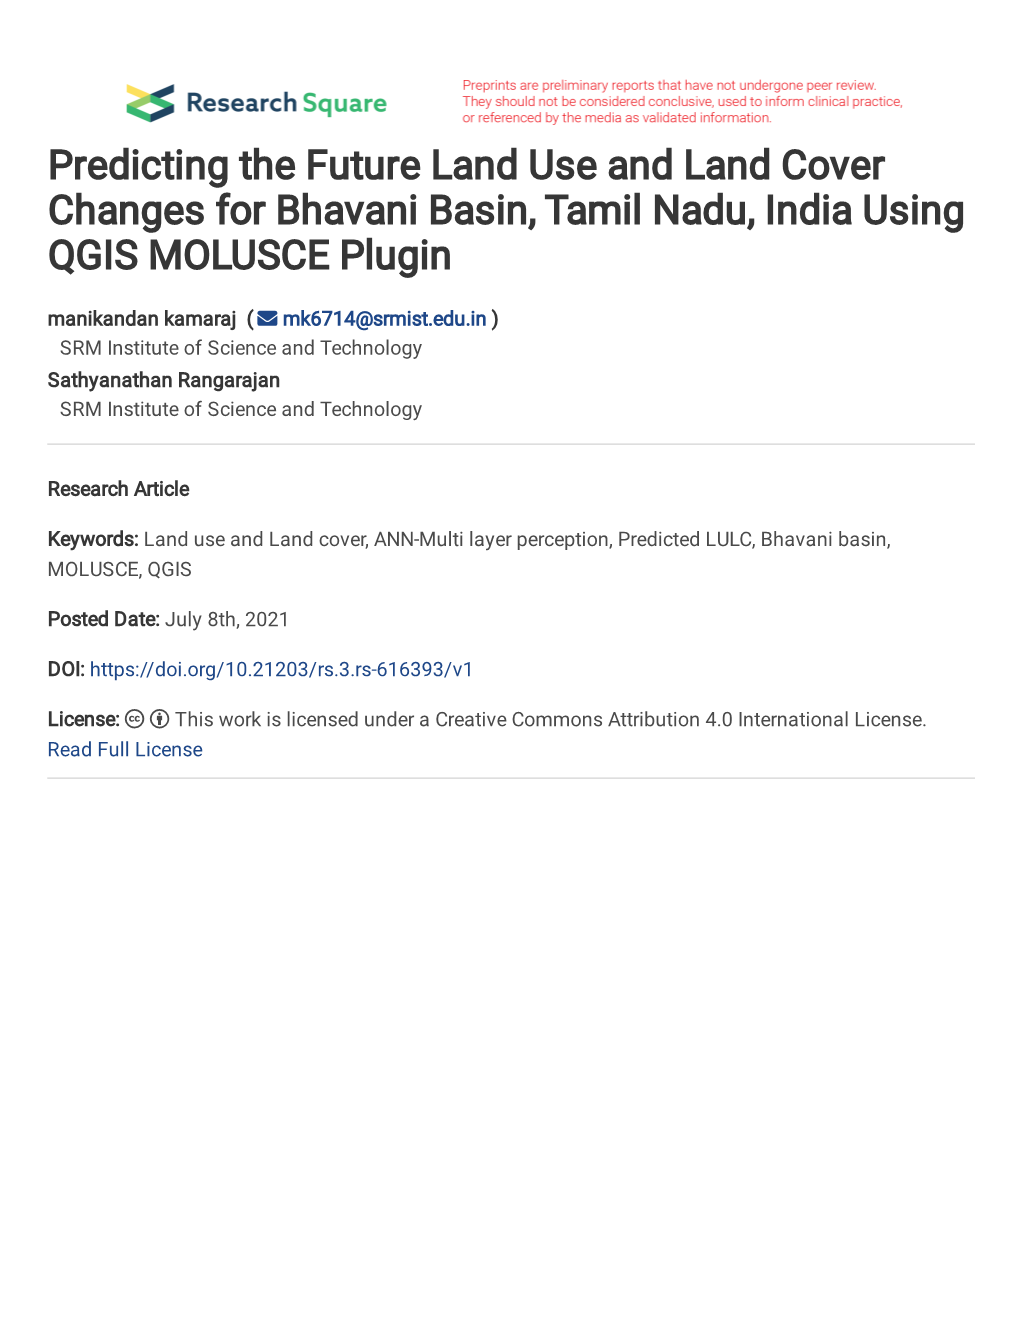 Predicting the Future Land Use and Land Cover Changes for Bhavani